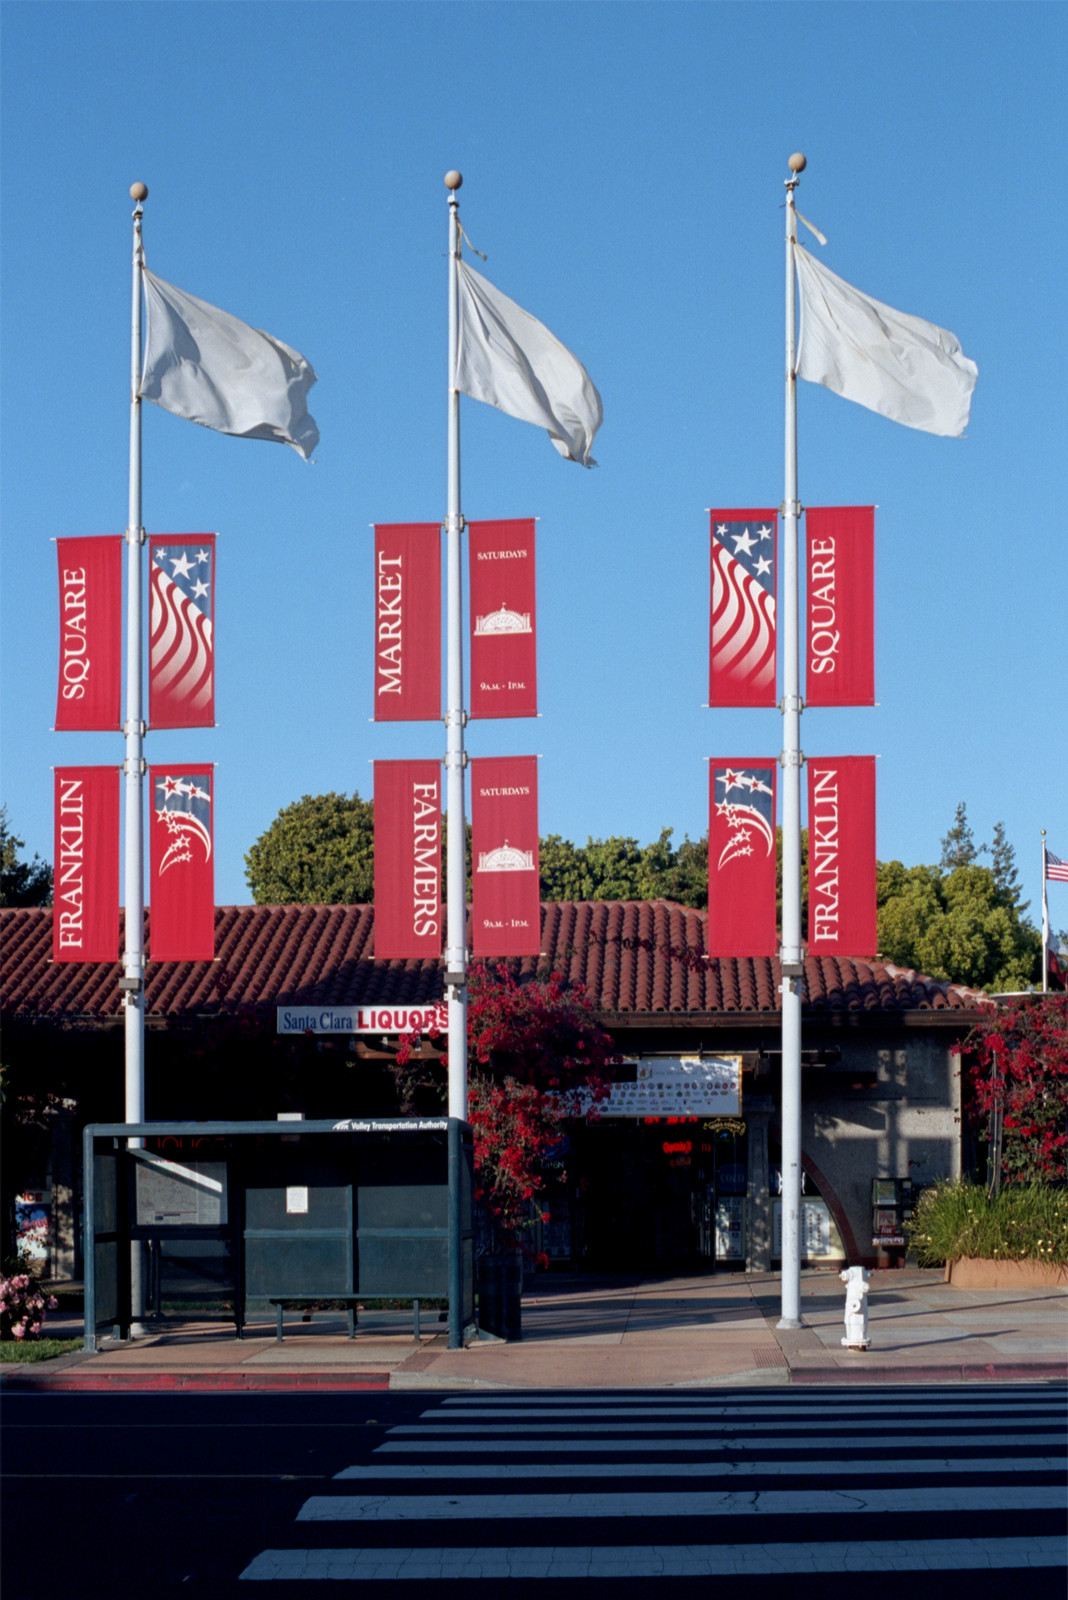 Three white flagpoles raise white flags and red scrolls announcing Franklin Plaza in Santa Clara, the center of the municipality. There are a number of businesses here in this pleasant environment.